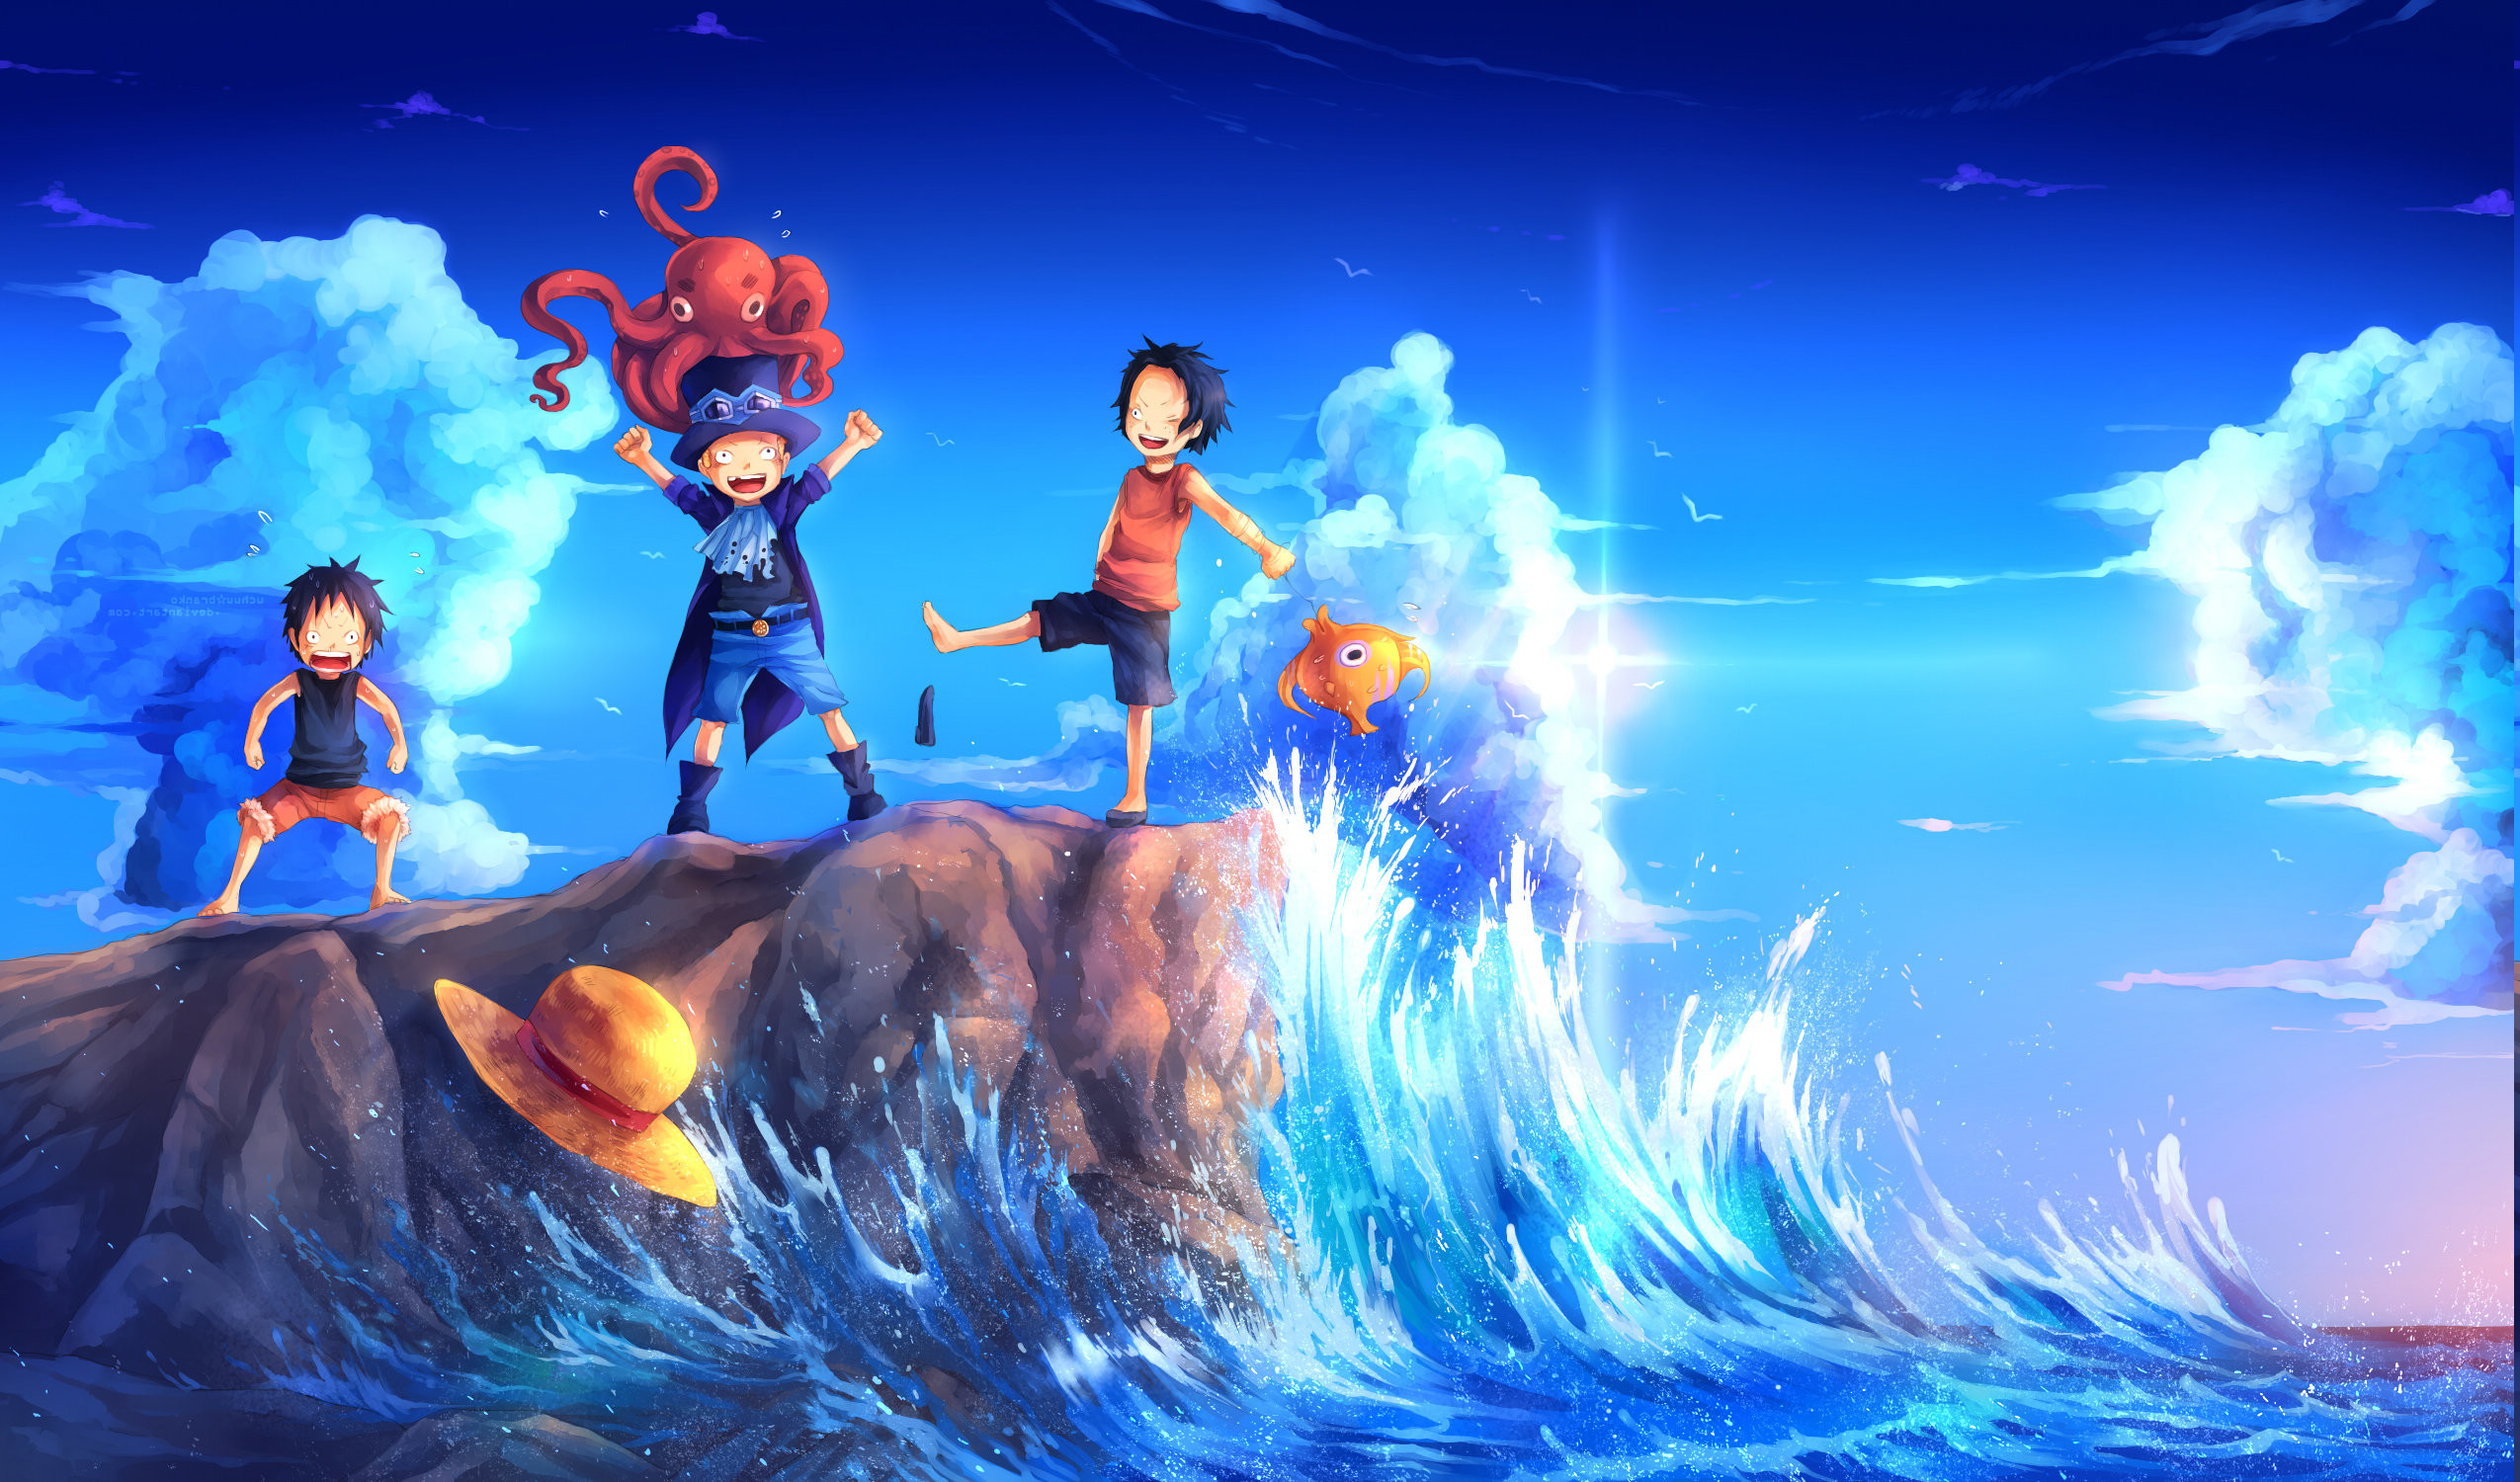 One Piece Monkey D Luffy Waves Portgas D Ace Sabo Fish Lens Flare Rock Wallpapers Hd Desktop And Mobile Backgrounds 2550x1500